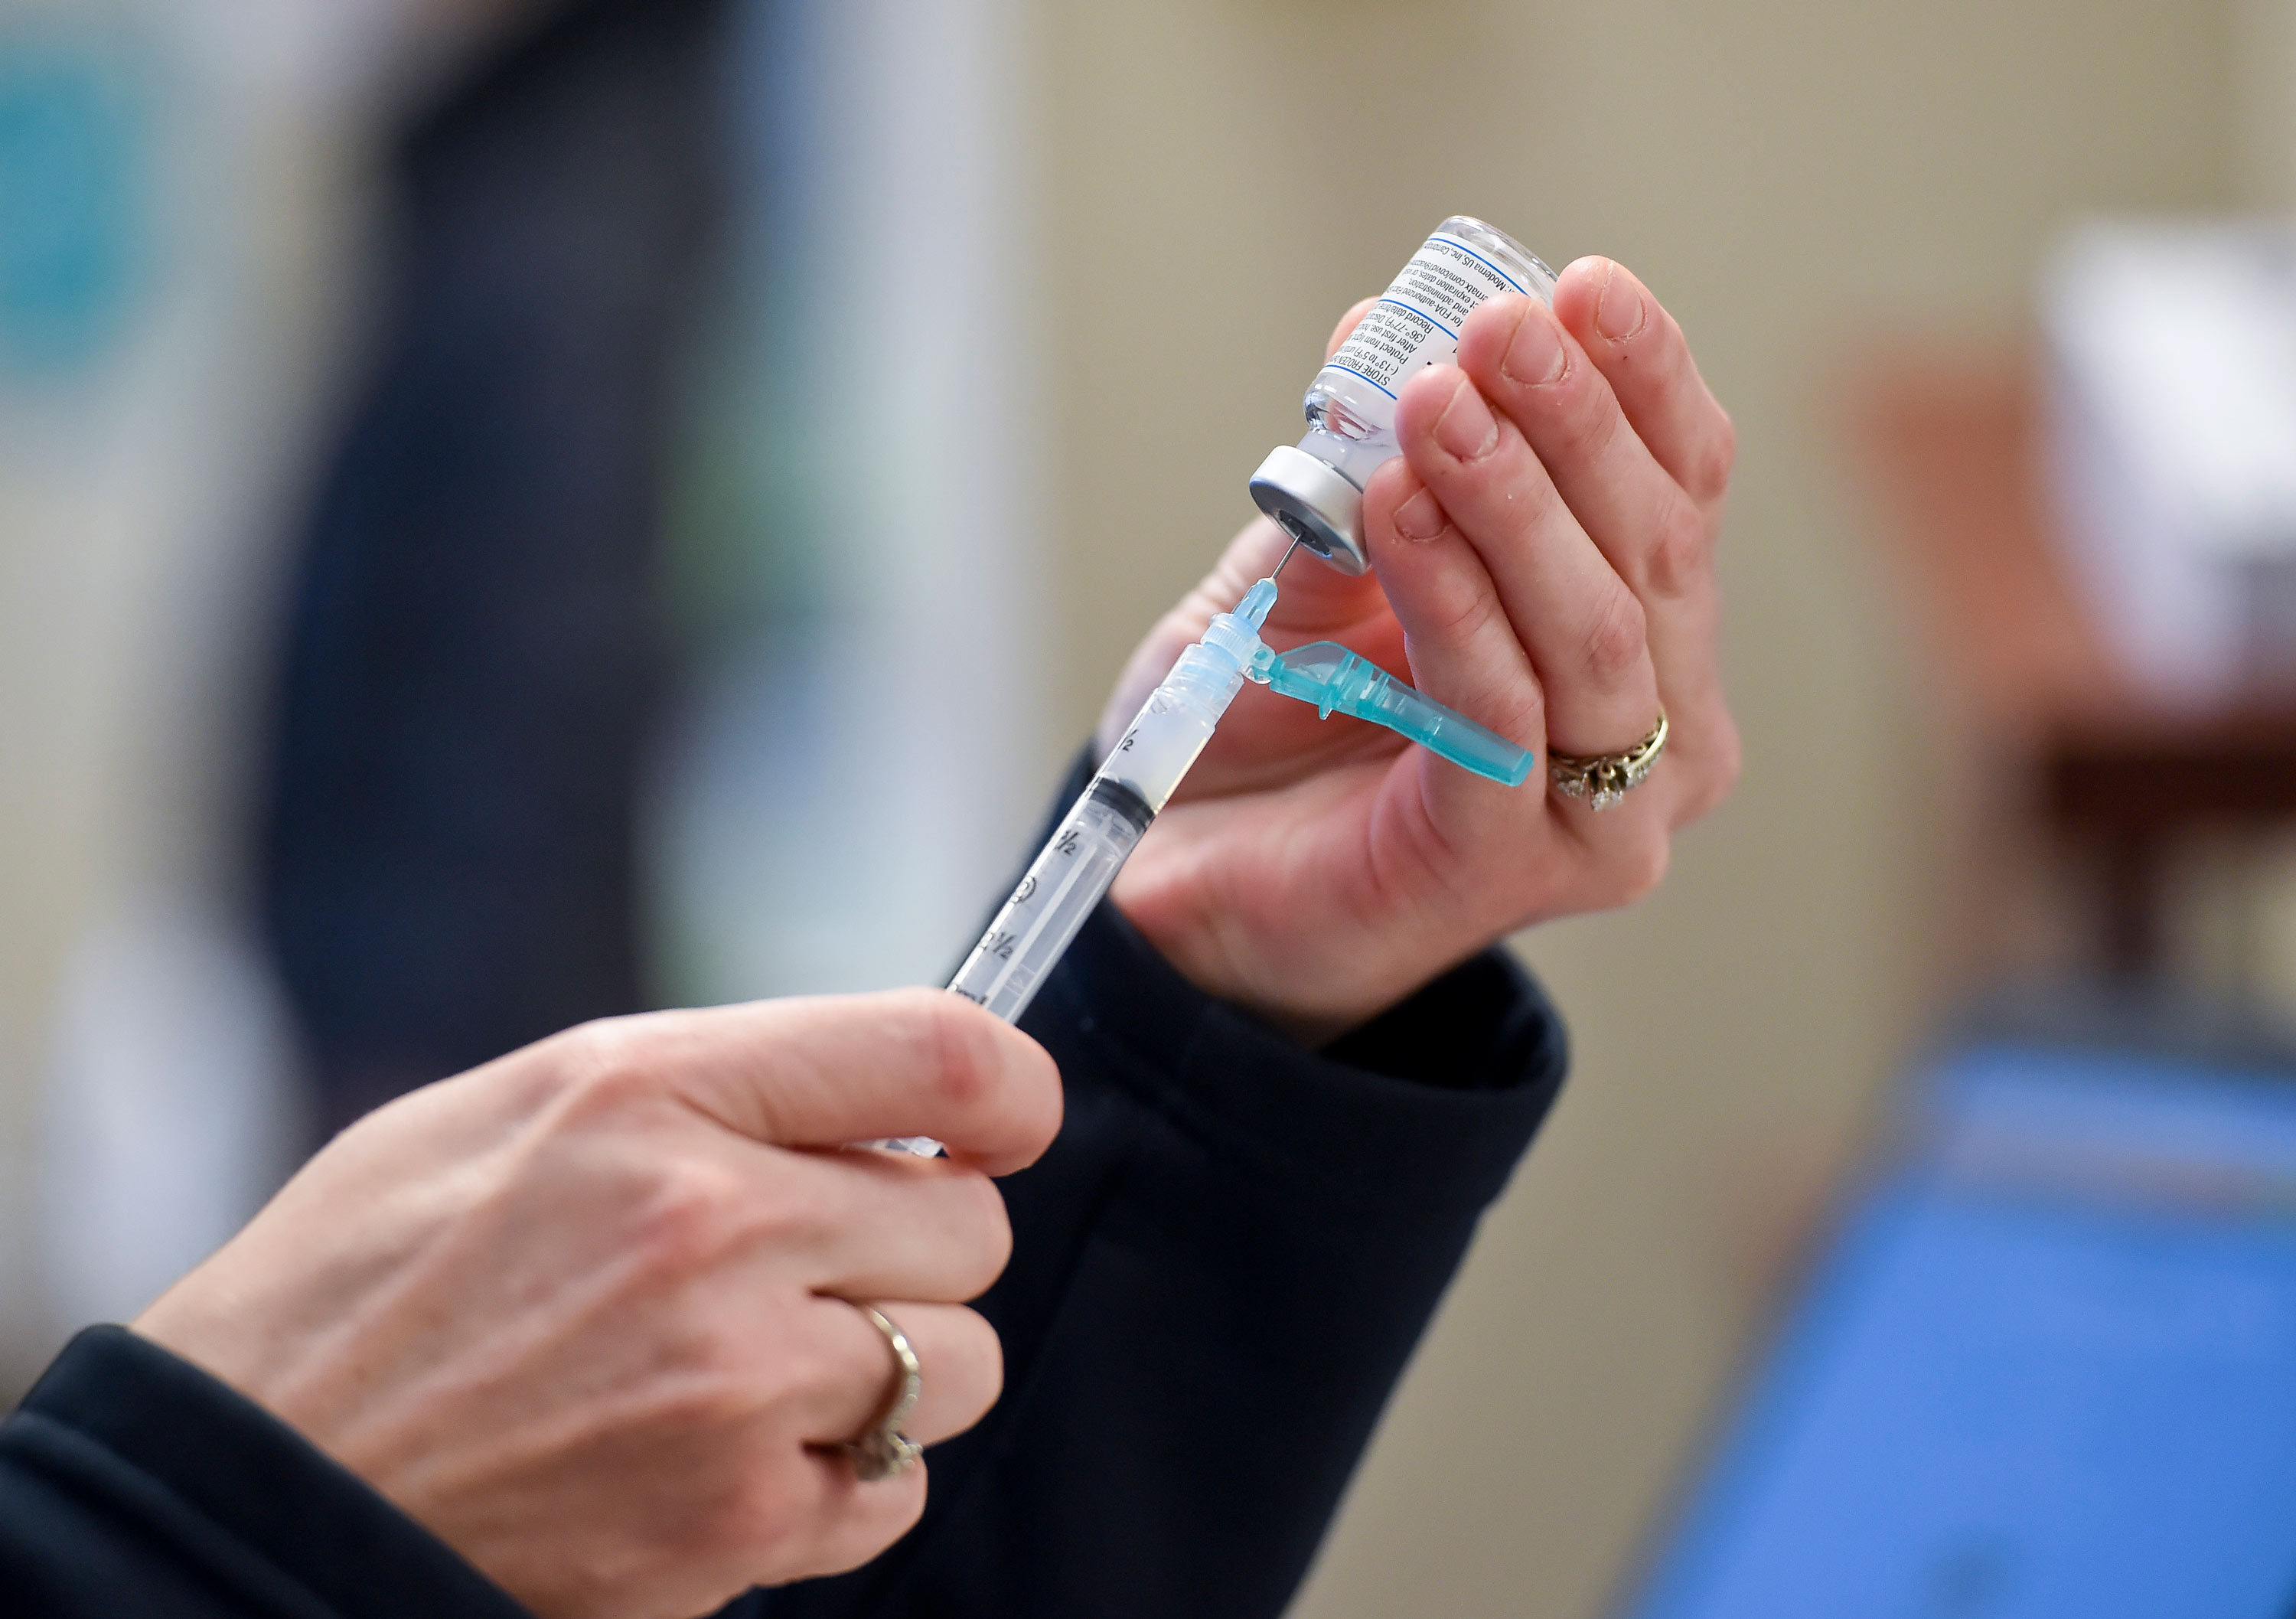 A syringe is filled with a dose of the Moderna COVID-19 vaccine at the Berks Community Health Center in Reading, Pennsylvania, on January 6.